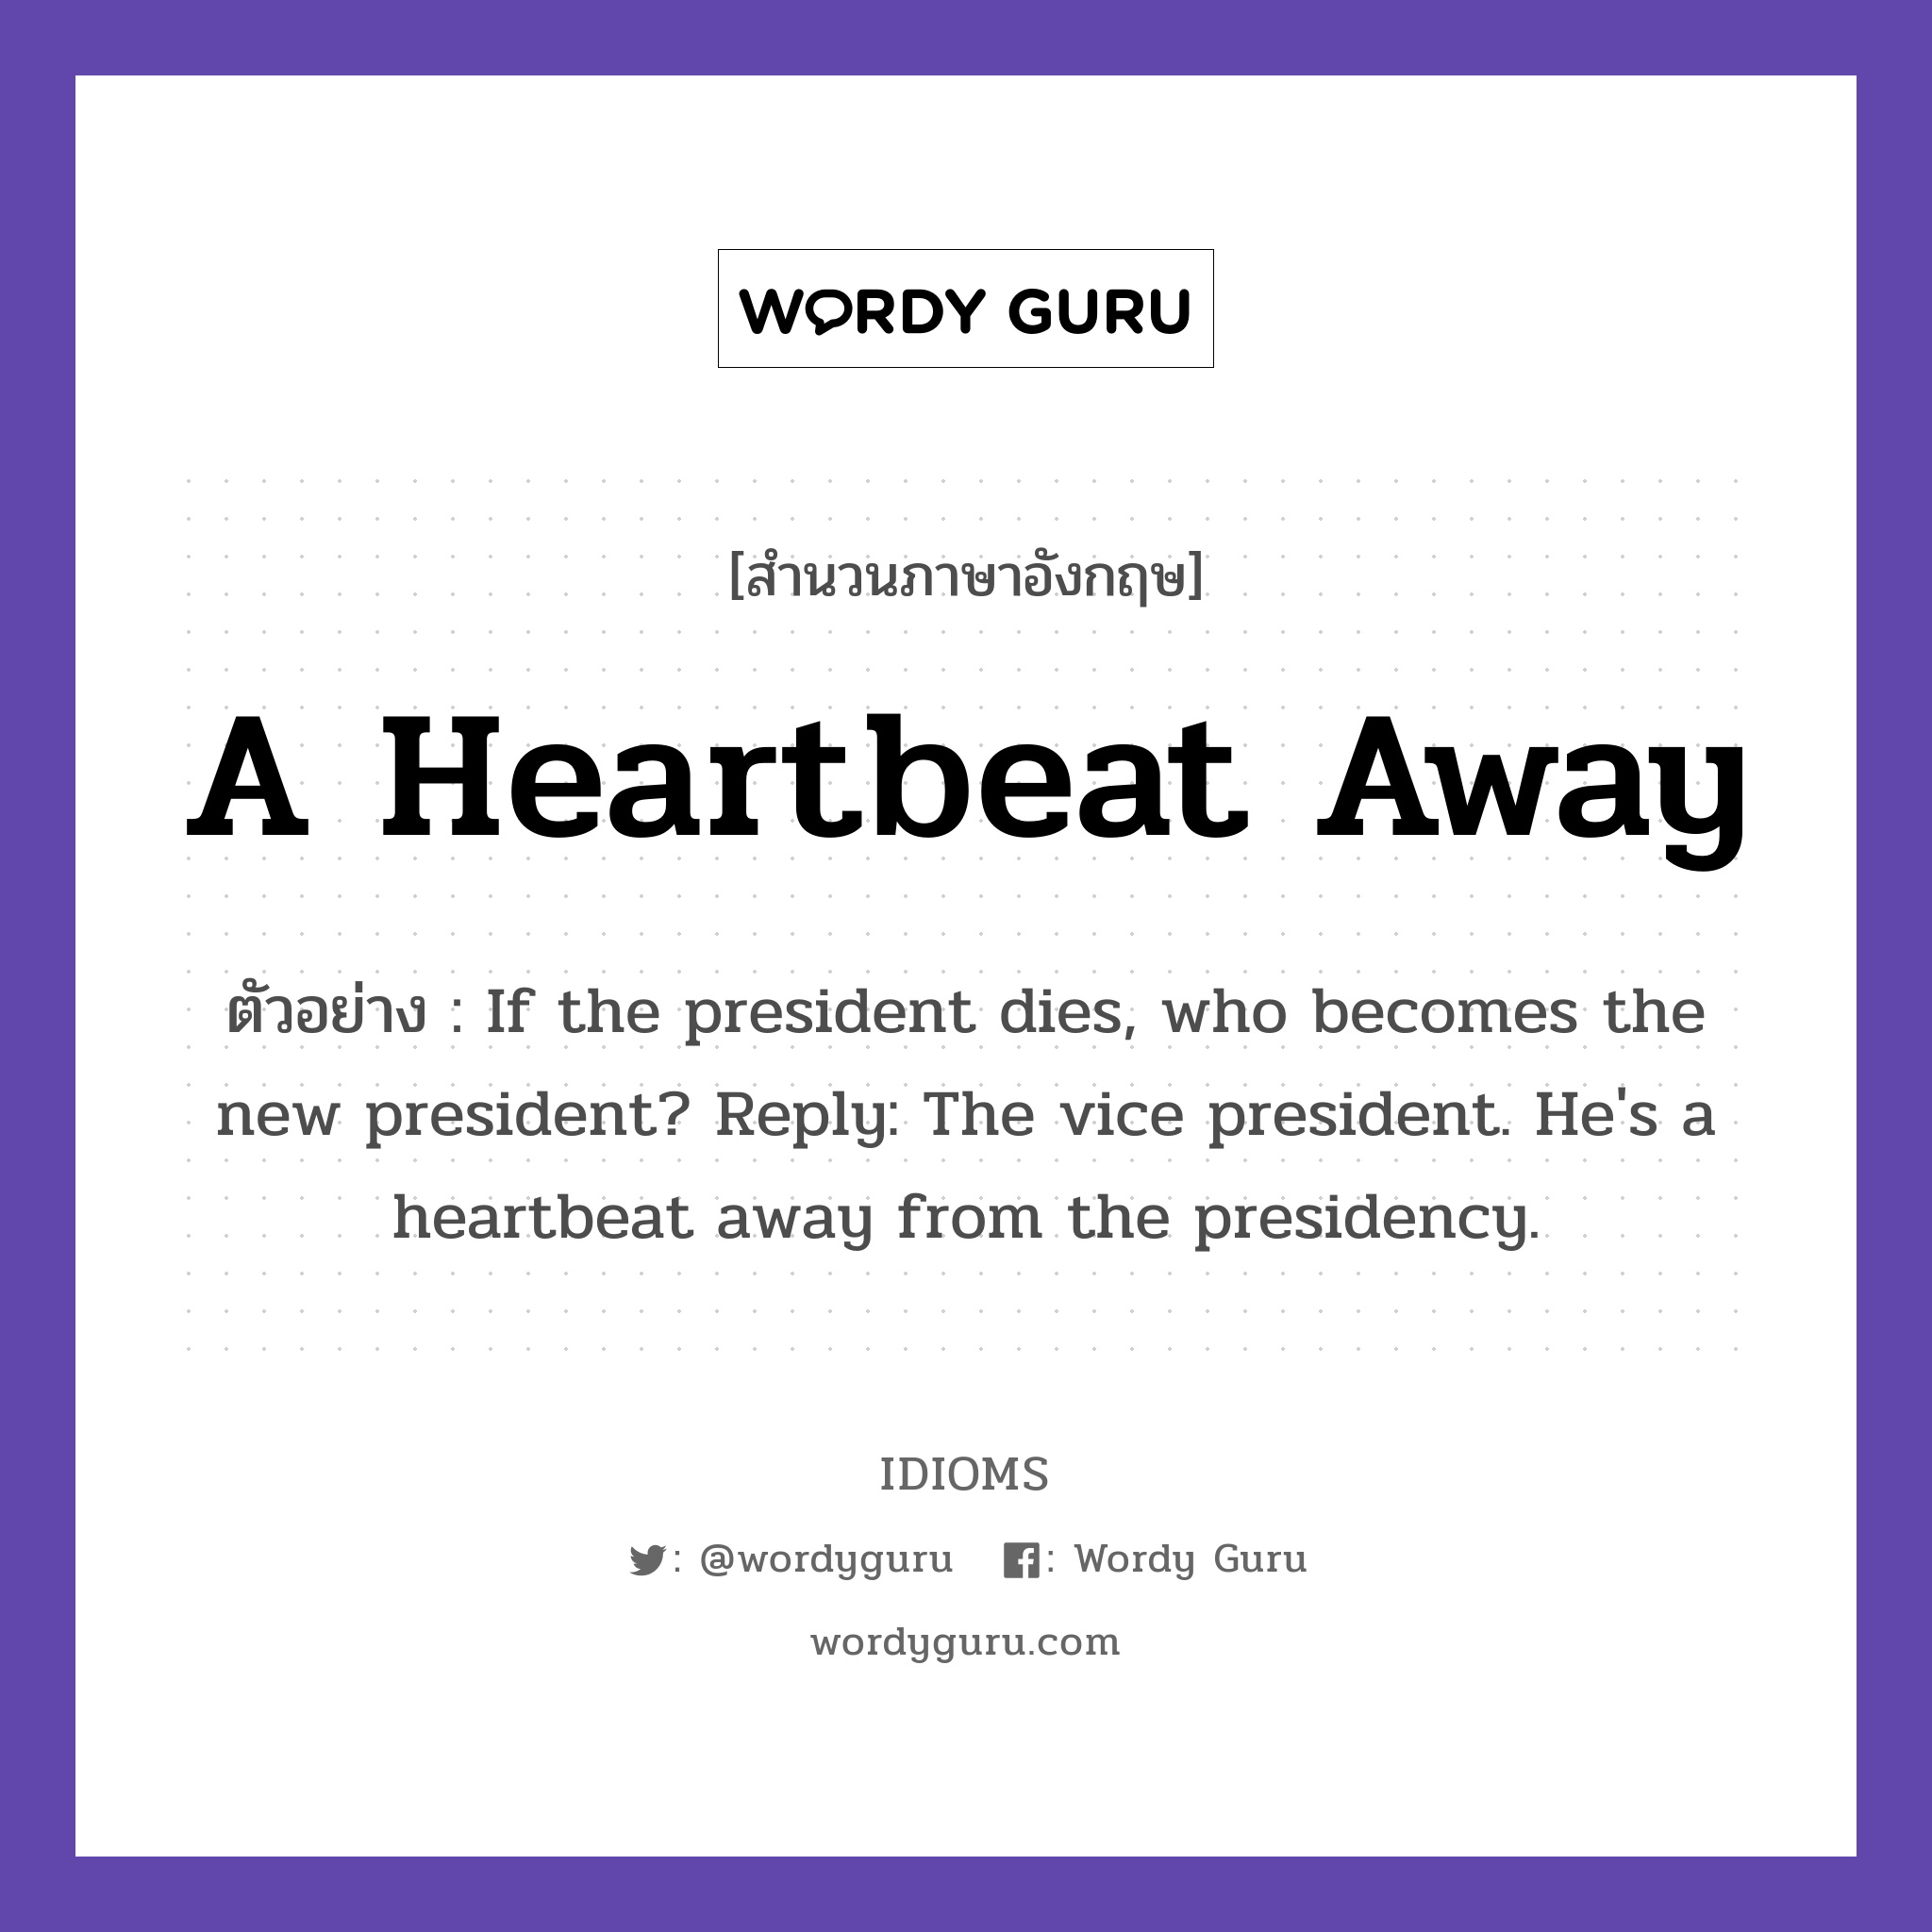 A Heartbeat Away แปลว่า?, สำนวนภาษาอังกฤษ A Heartbeat Away ตัวอย่าง If the president dies, who becomes the new president? Reply: The vice president. He's a heartbeat away from the presidency.